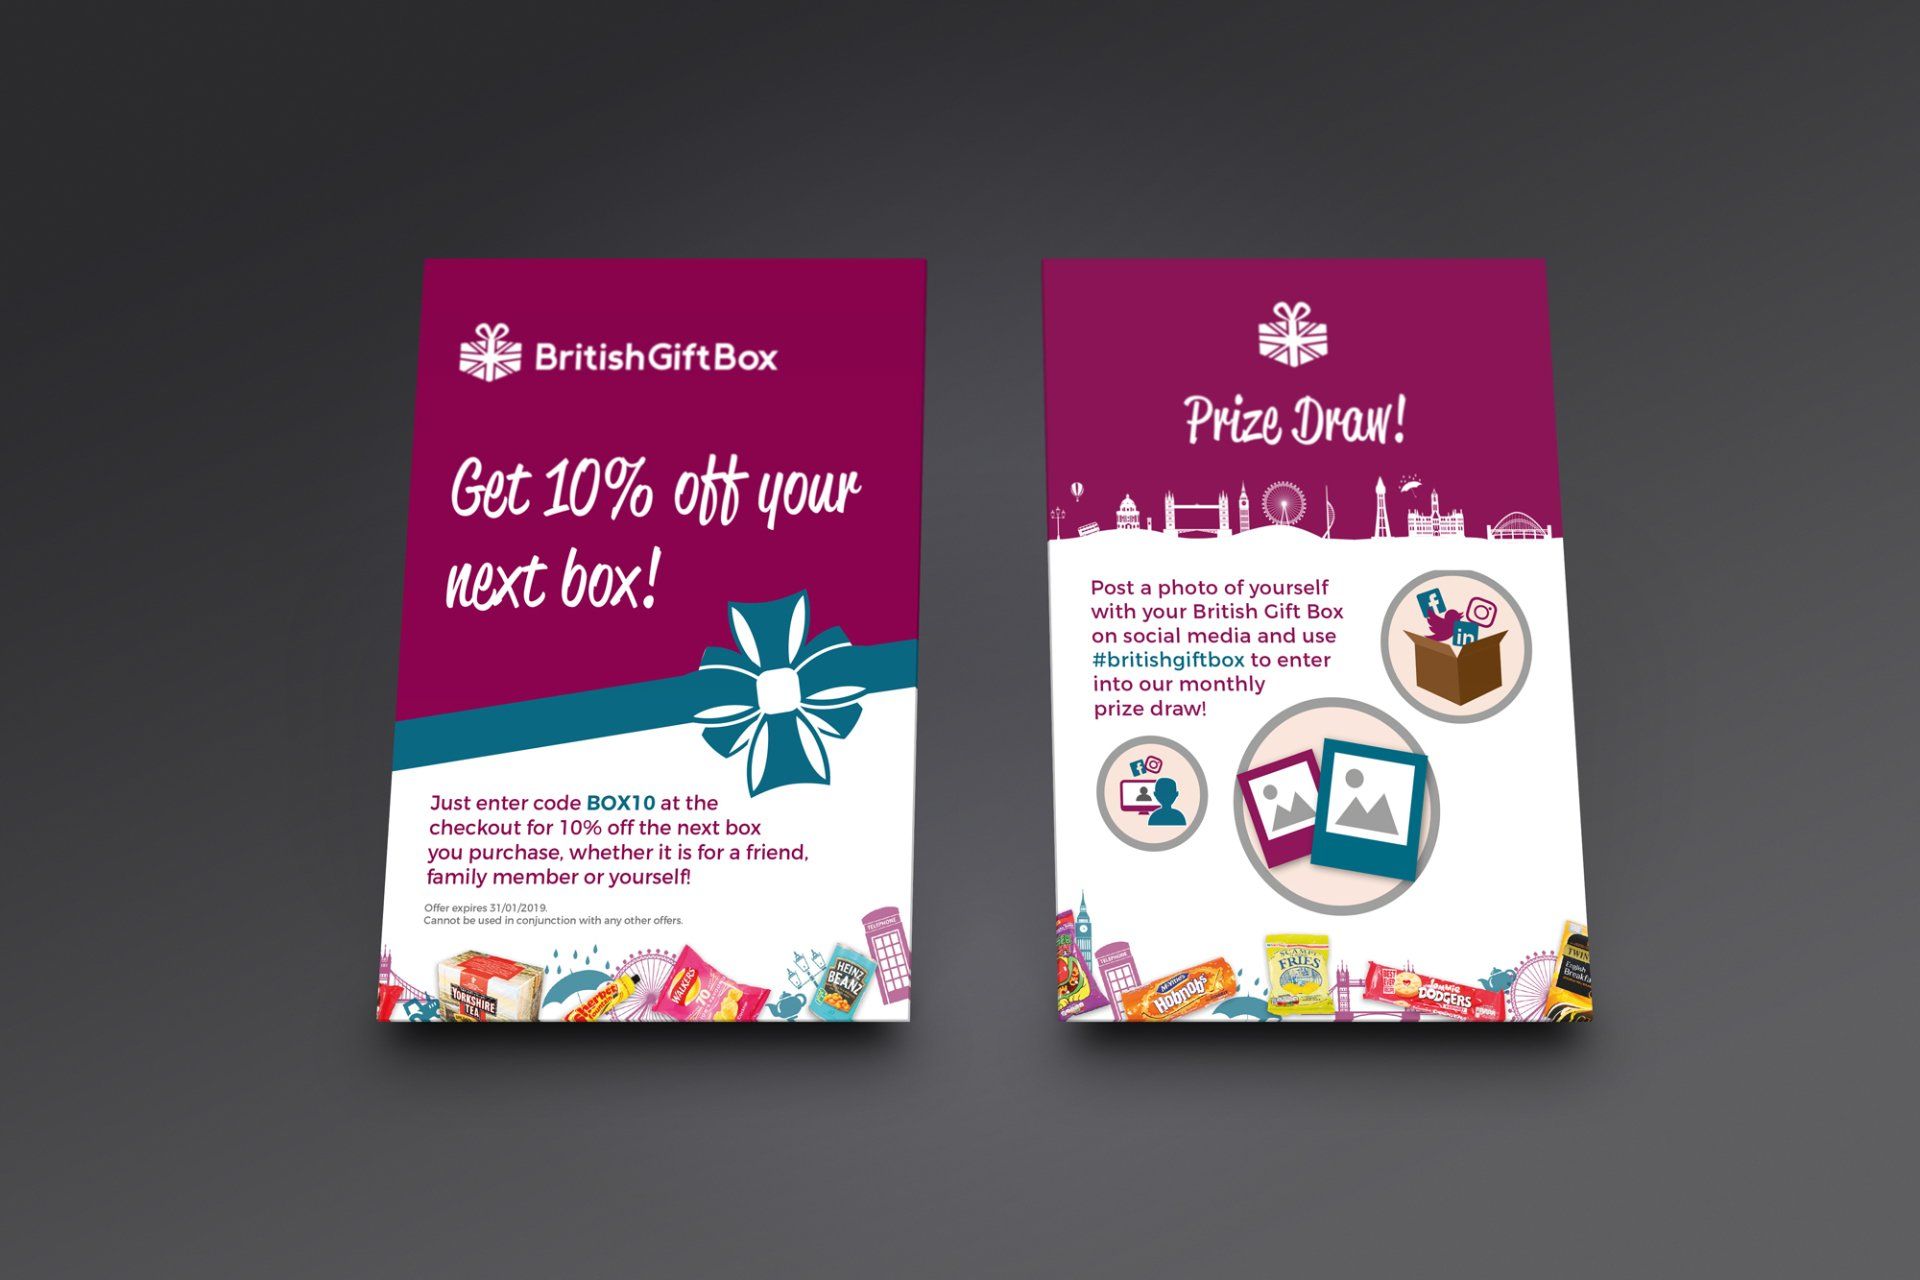 Two campaigns from British Gift box - a discount code and a prize draw